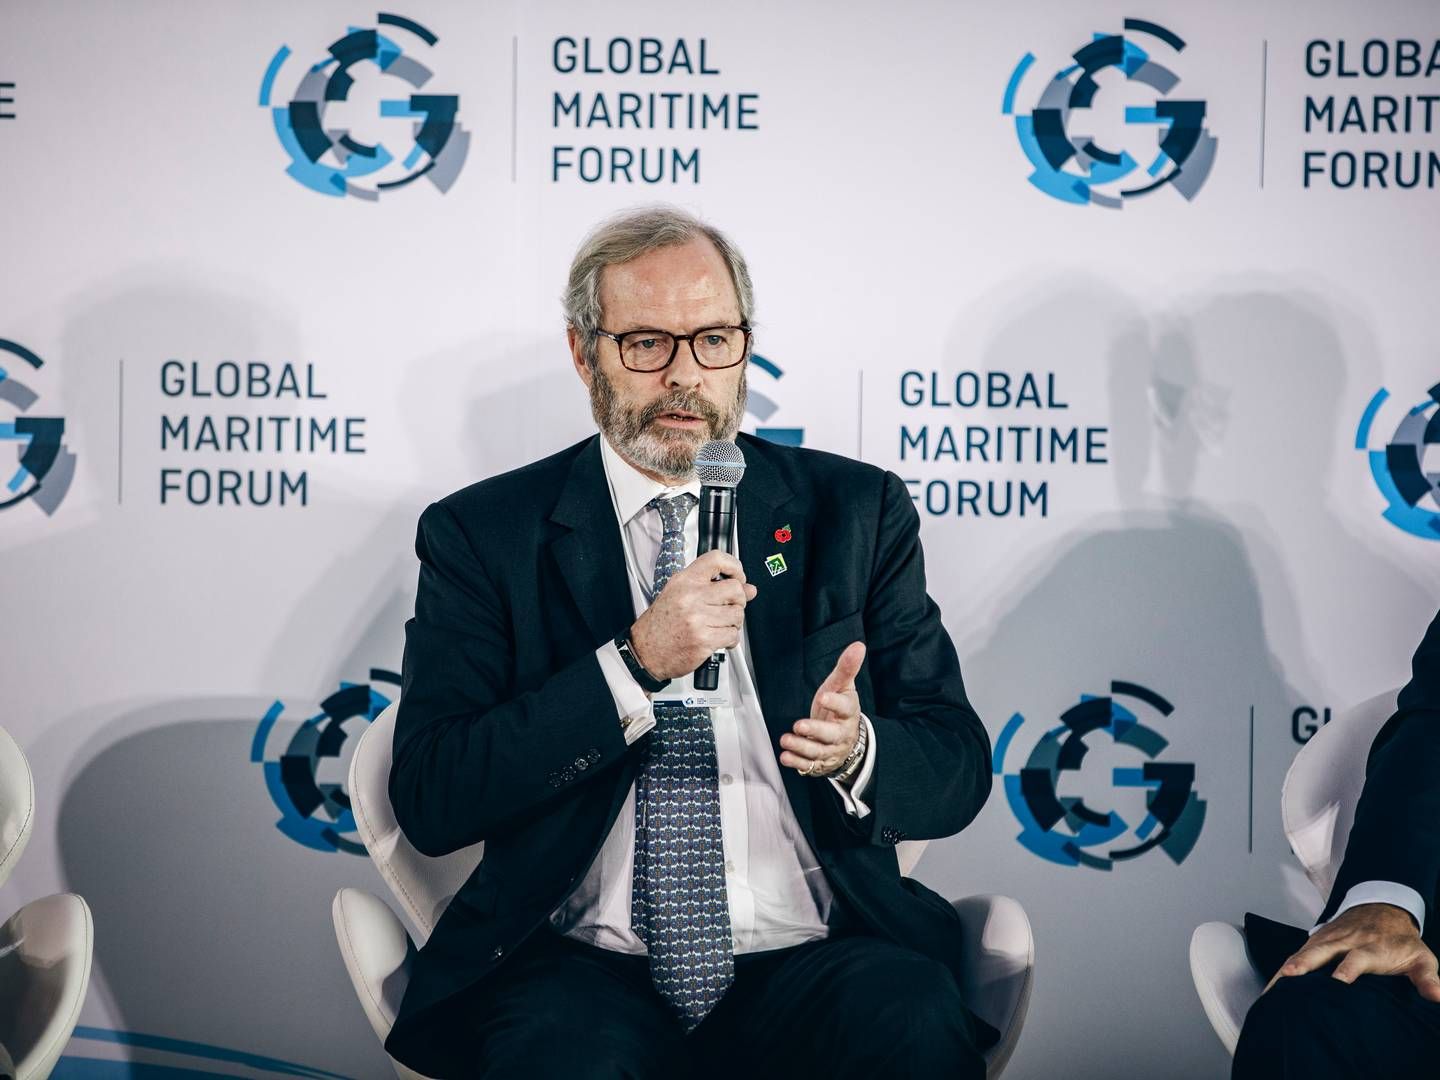 ”Our focus is on working with our clients to help them to a greener, more sustainable mari:me future through the energy transi:on to net zero once the fuels, ships and technology are available at scale,” says Michael Parker, chair of the Poseidon Principles. | Photo: Global Maritime Forum